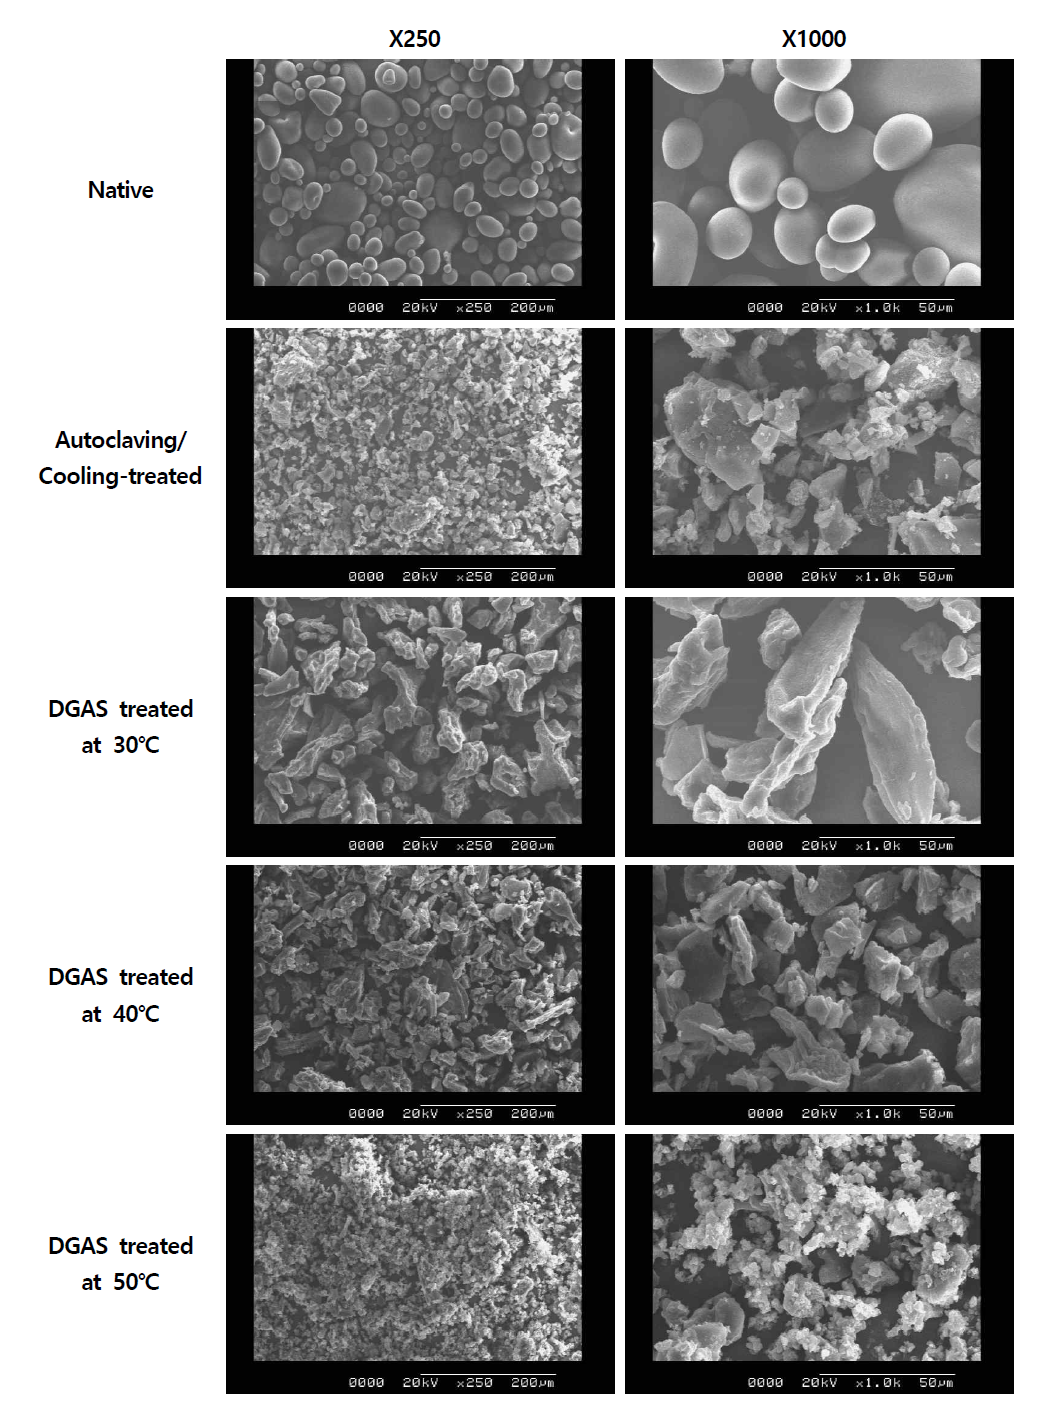 Scanning electron microscope micrographs of native, autoclaving/cooling-treated, DGAS-treated potato starches.